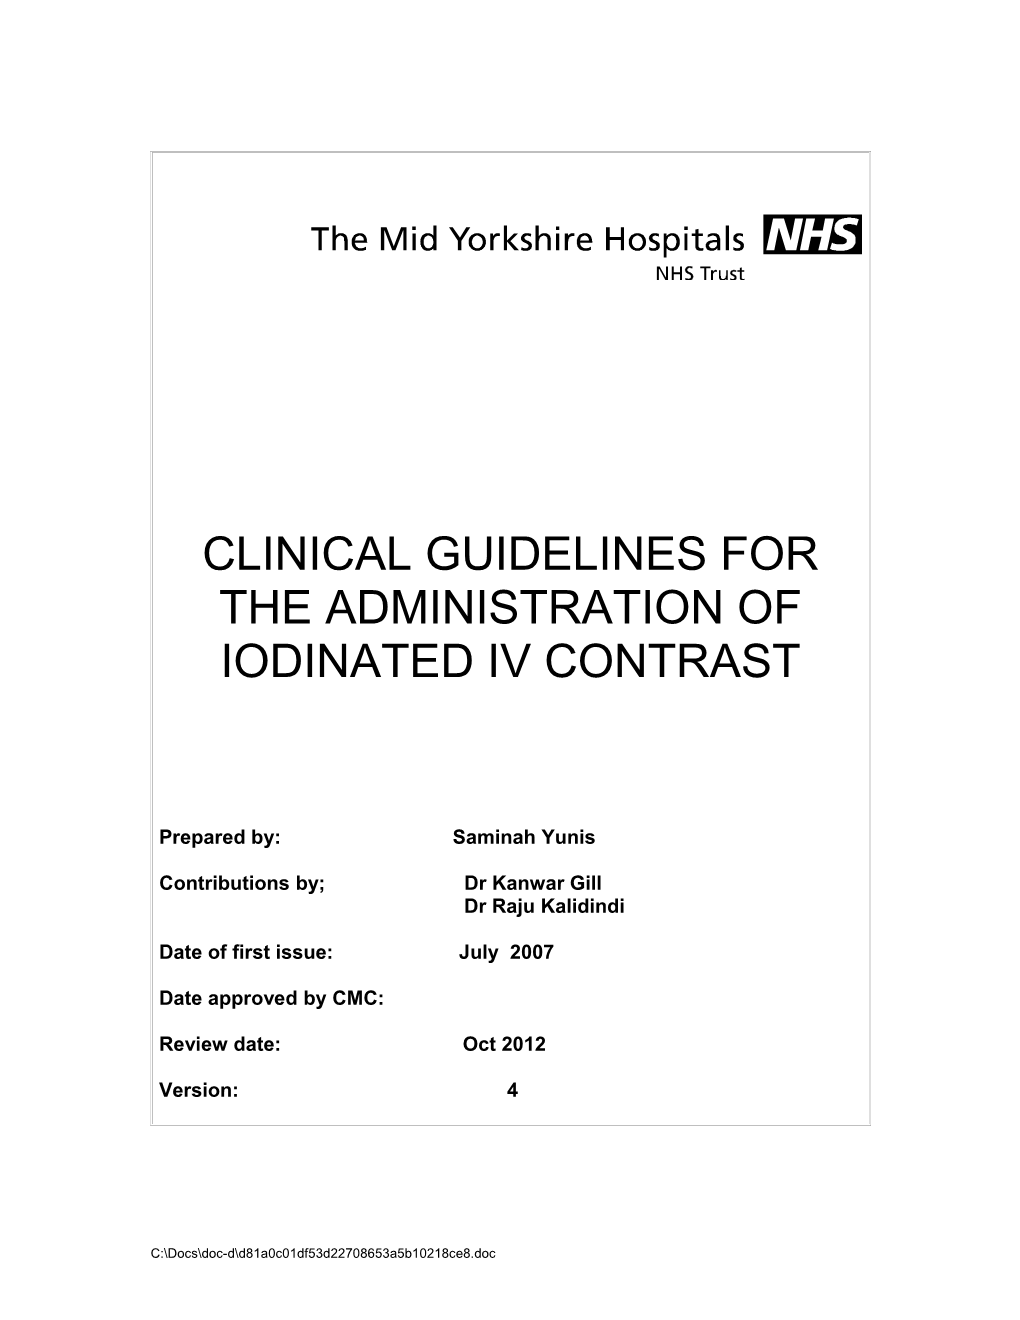 Clinical Guidelines for the Administration of Iodinated Iv Contrast